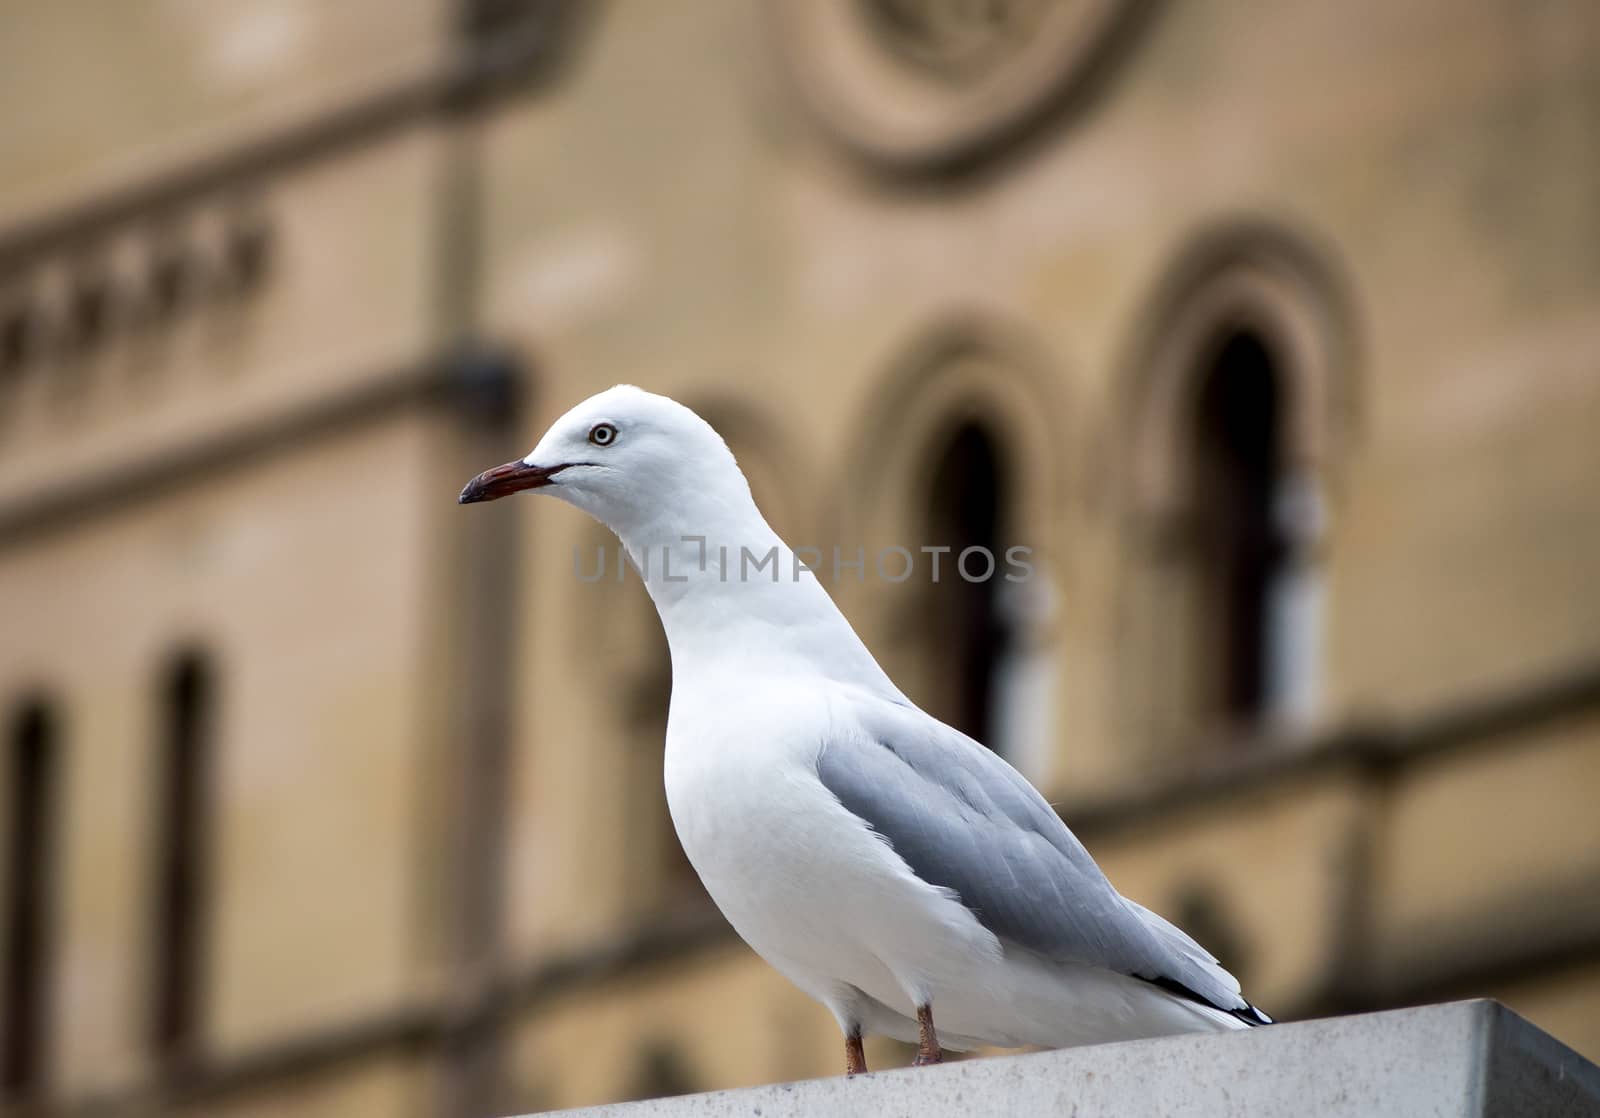 Seagull in city centre watching for food